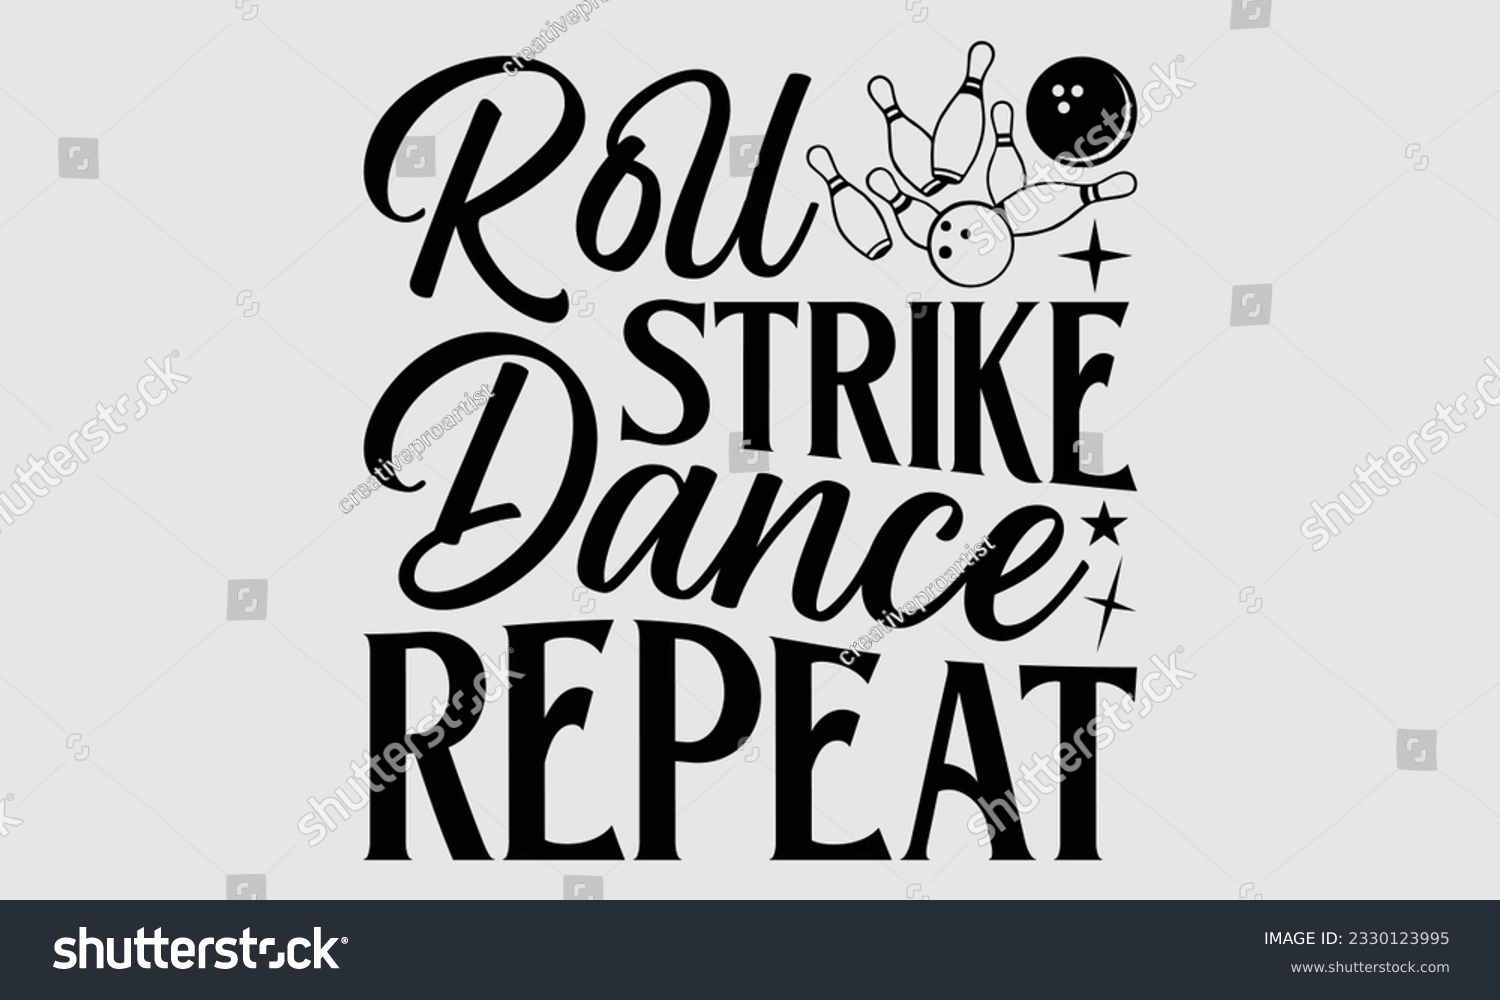 SVG of Roll Strike Dance Repeat- Bowling t-shirt design, Illustration for prints on SVG and bags, posters, cards, greeting card template with typography text EPS svg